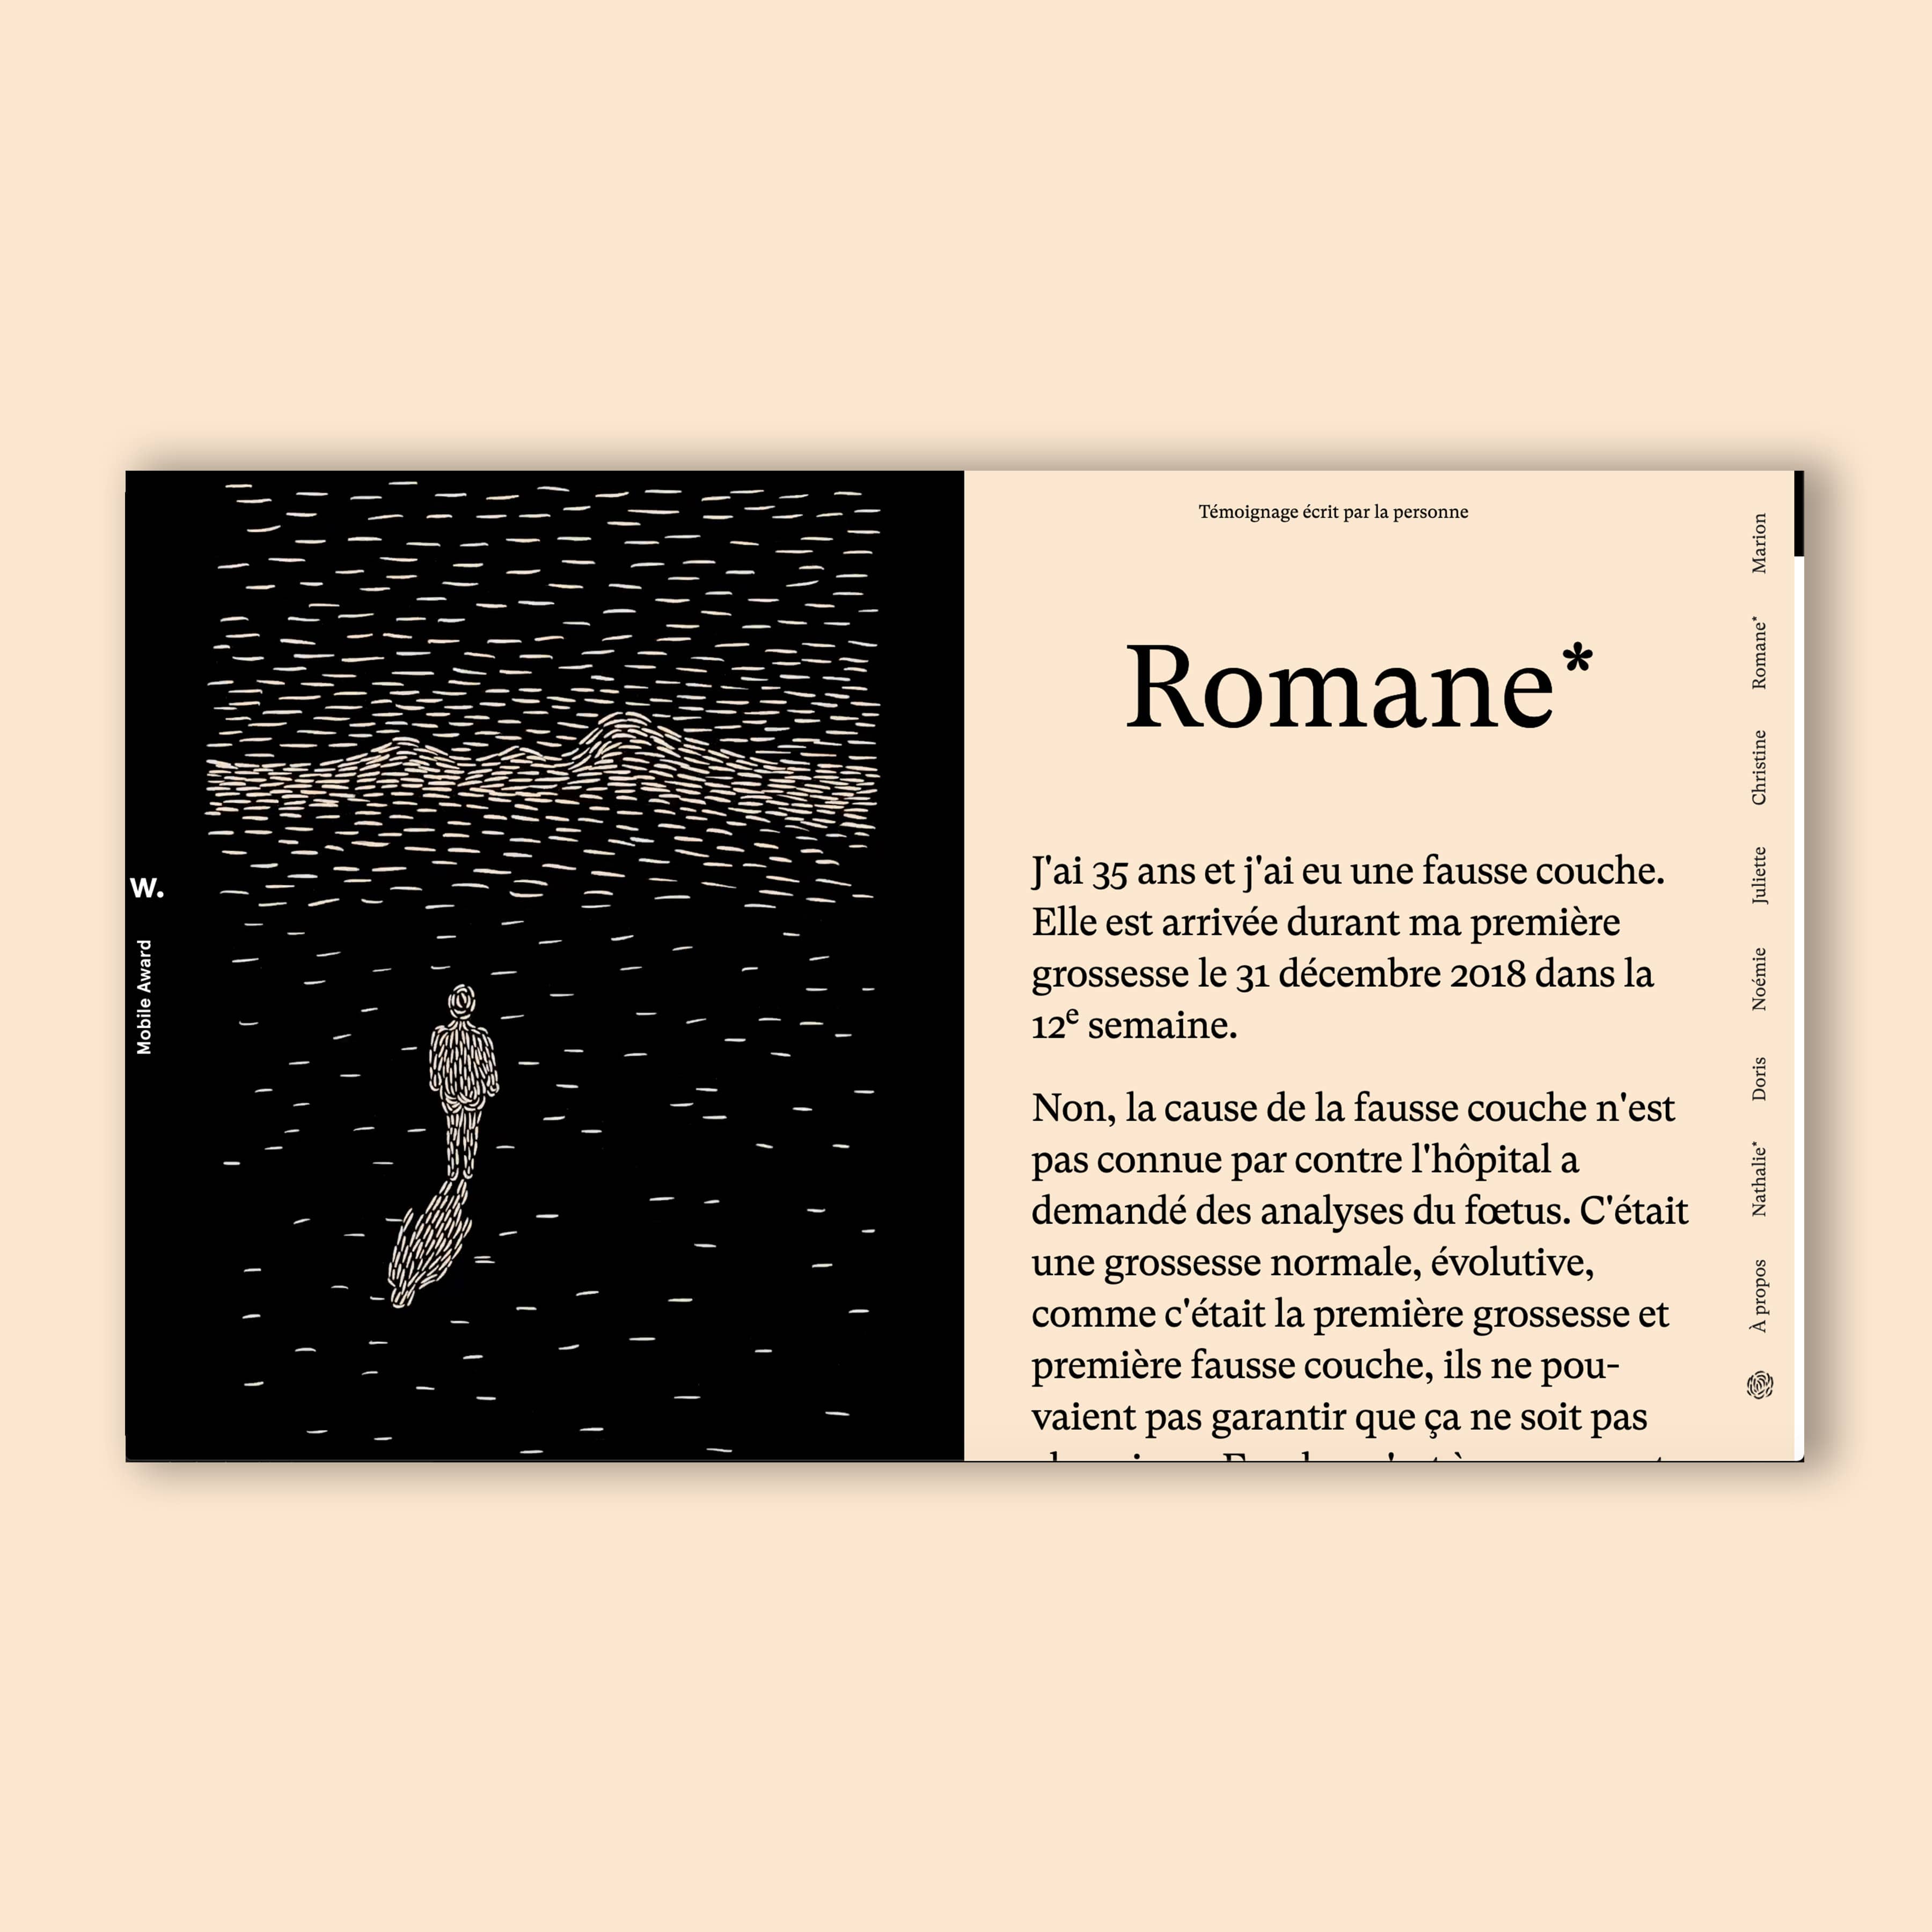 Page of the interview of Romane.